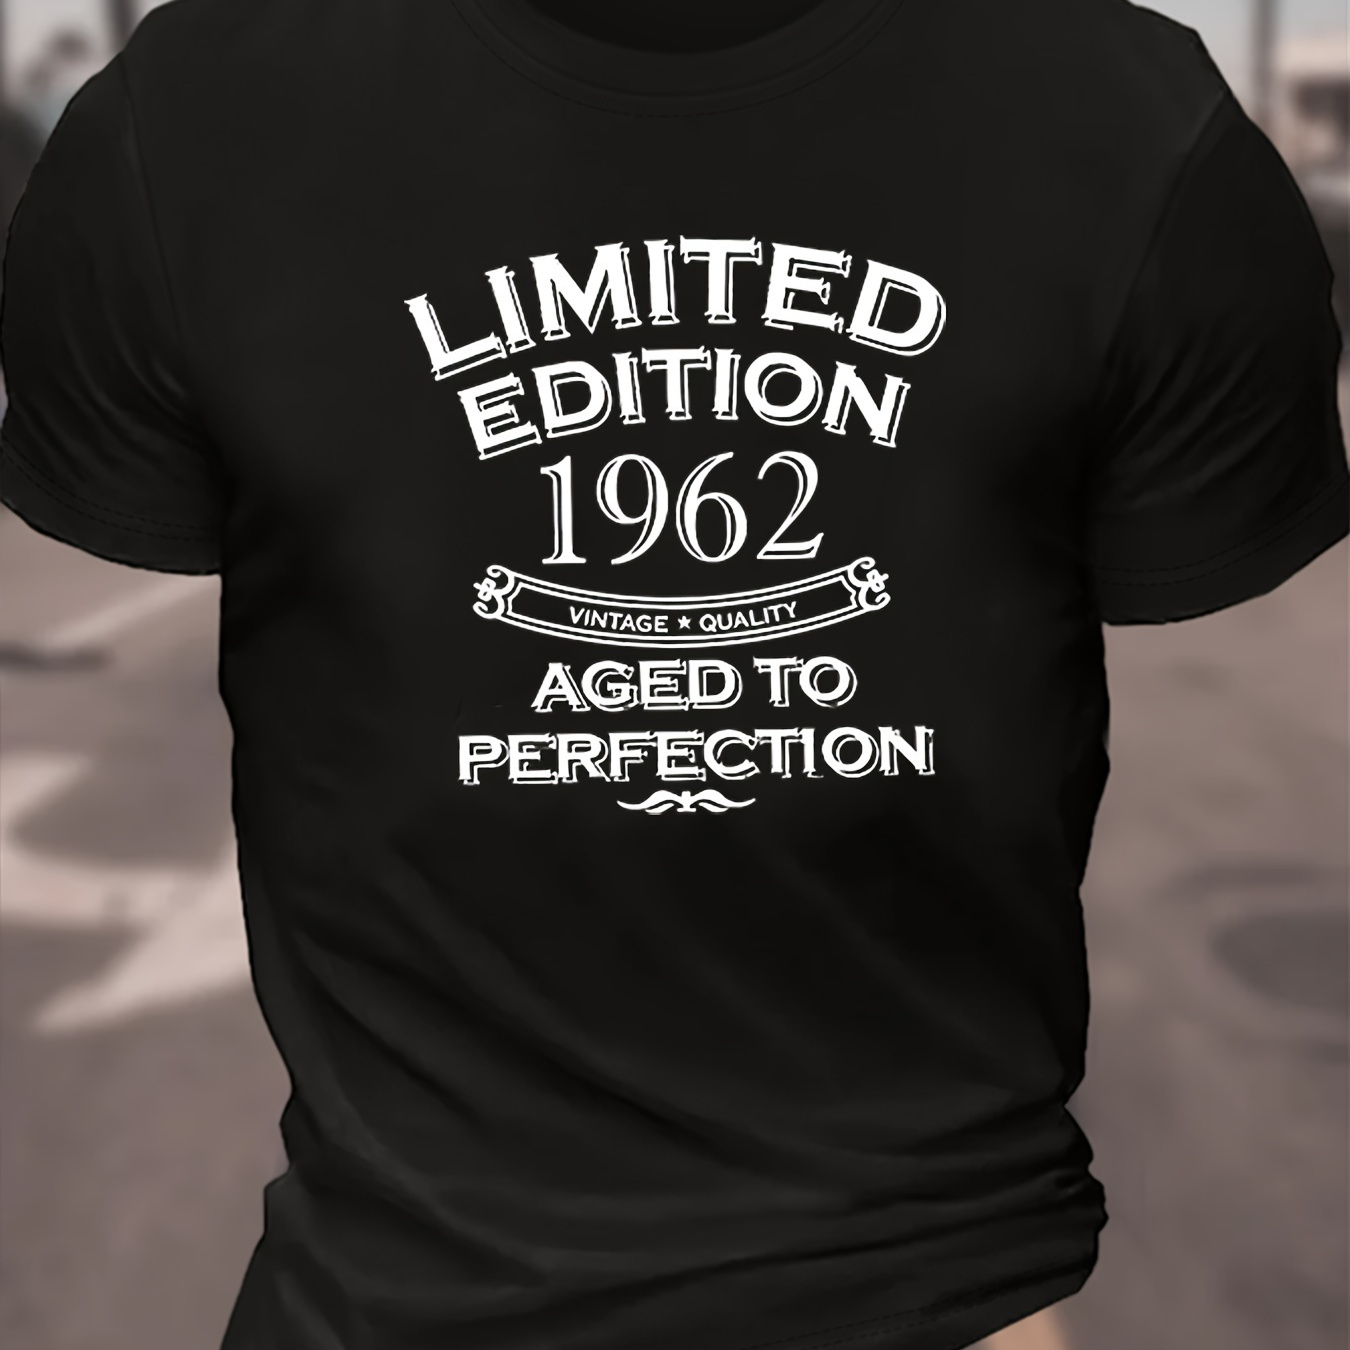 

Limited Edition 1962 Print Men's Creative Top, Casual Short Sleeve Crew Neck T-shirt, Men's Clothing For Summer Outdoor